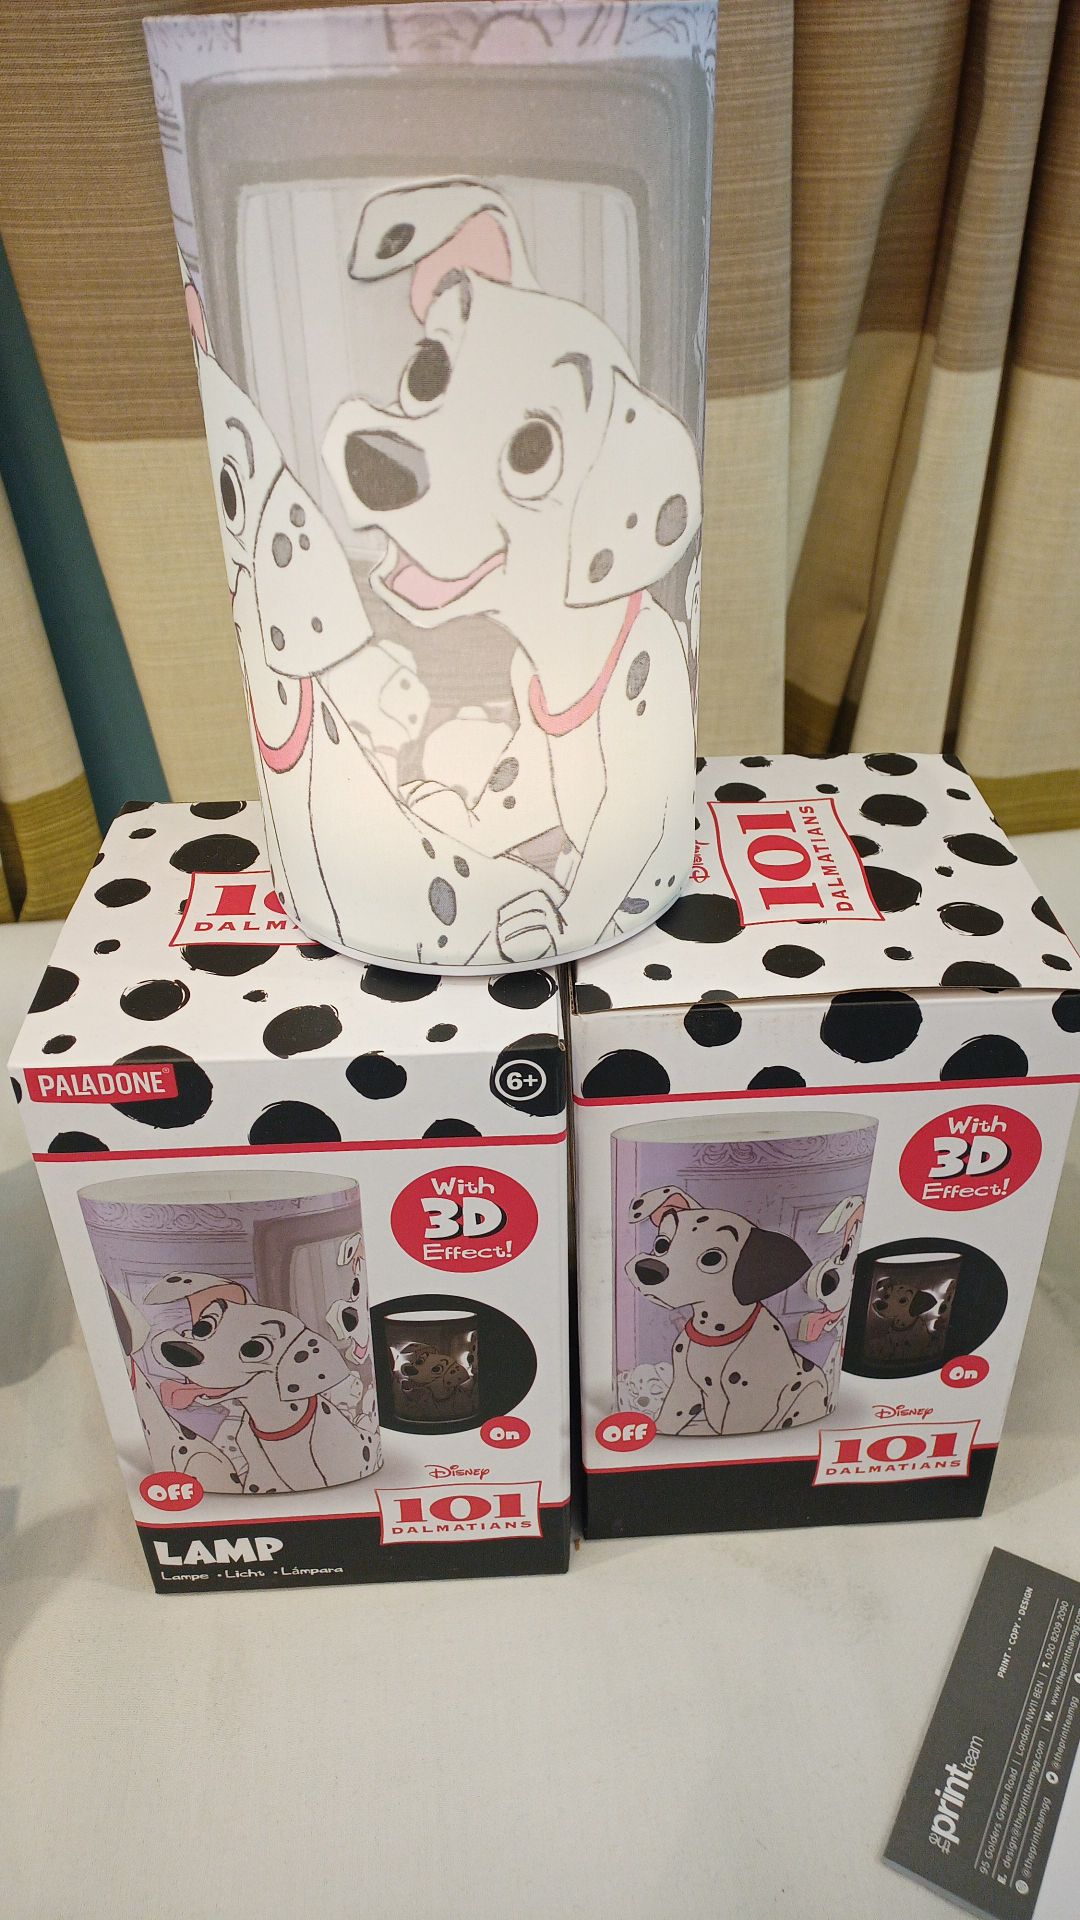 100pcs Brand new Sealed Dalmatian Disney Light set - boxed and new rrp £14.99 each - 100pcs in lot